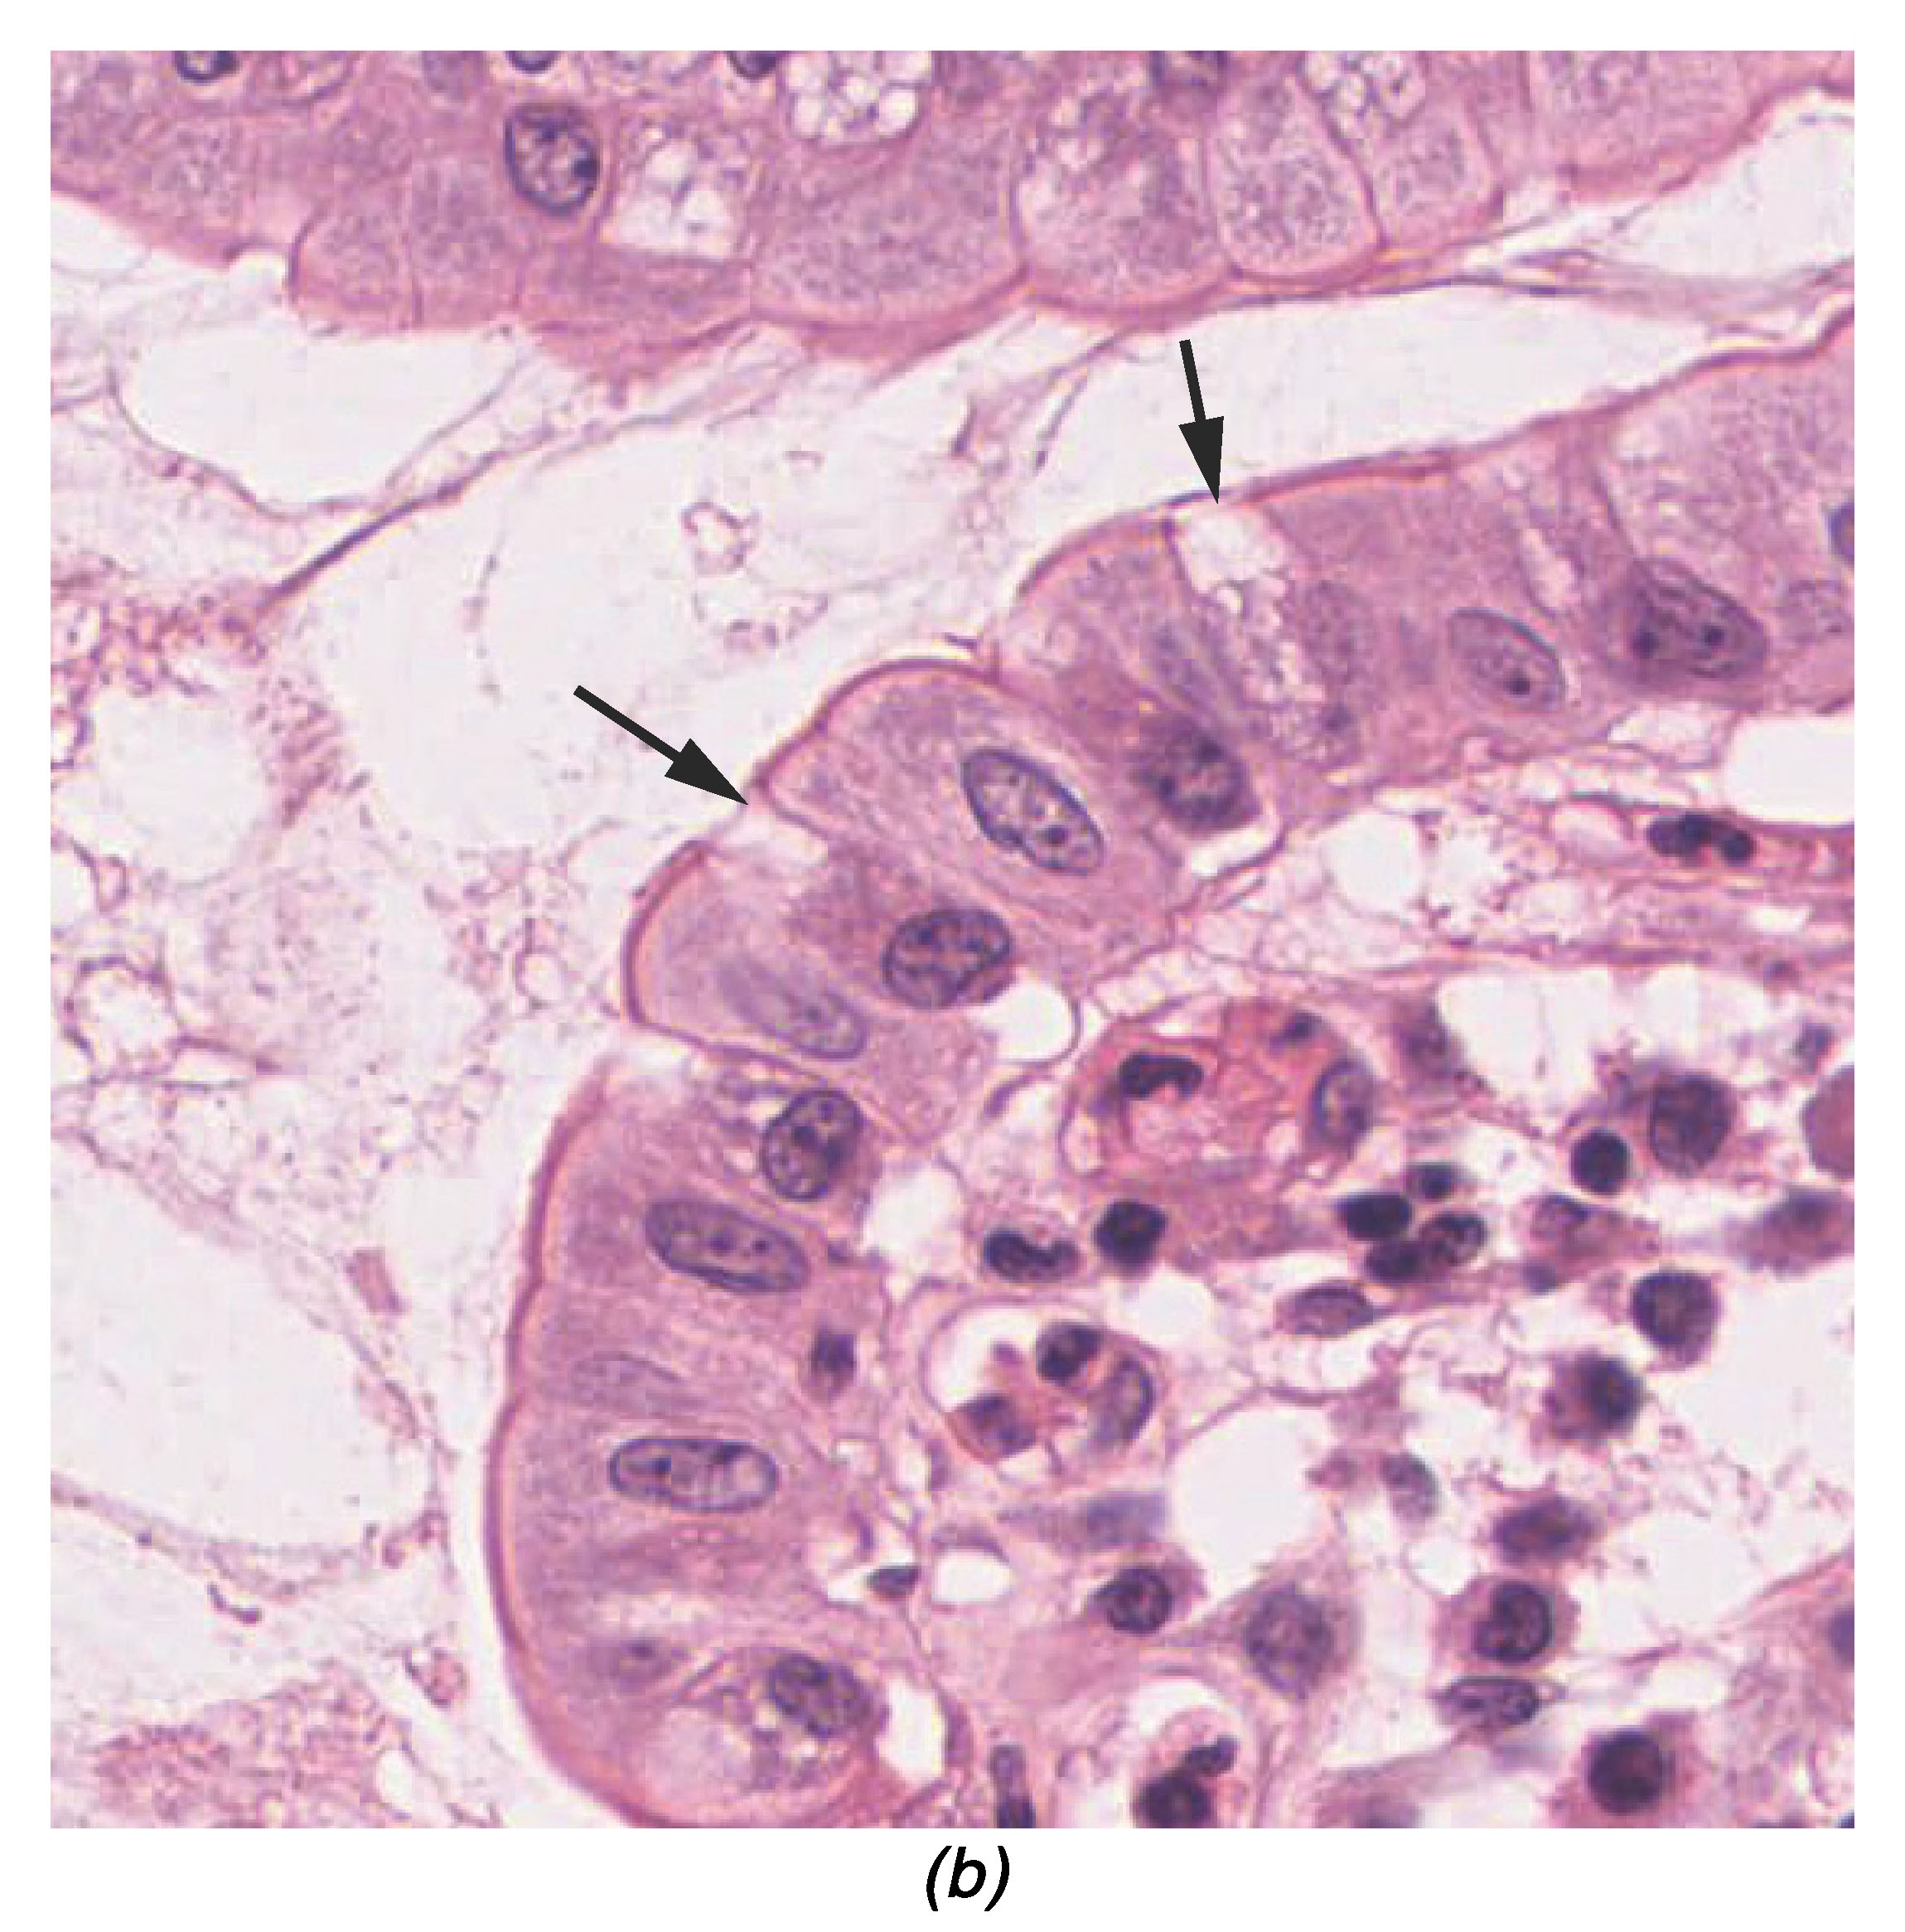 The second image is a micrograph of the innermost lining of the small intestine. This innermost lining is a simple columnar epithelium, with a single layer of rectangular cells oriented in a line. Occasionally, the line of epithelial cells is interrupted by a goblet cell. Goblet cells are thinner than the epithelial cells and appear roughly pill shaped. In this micrograph, the cells did not stain as darkly as the epithelial cells.